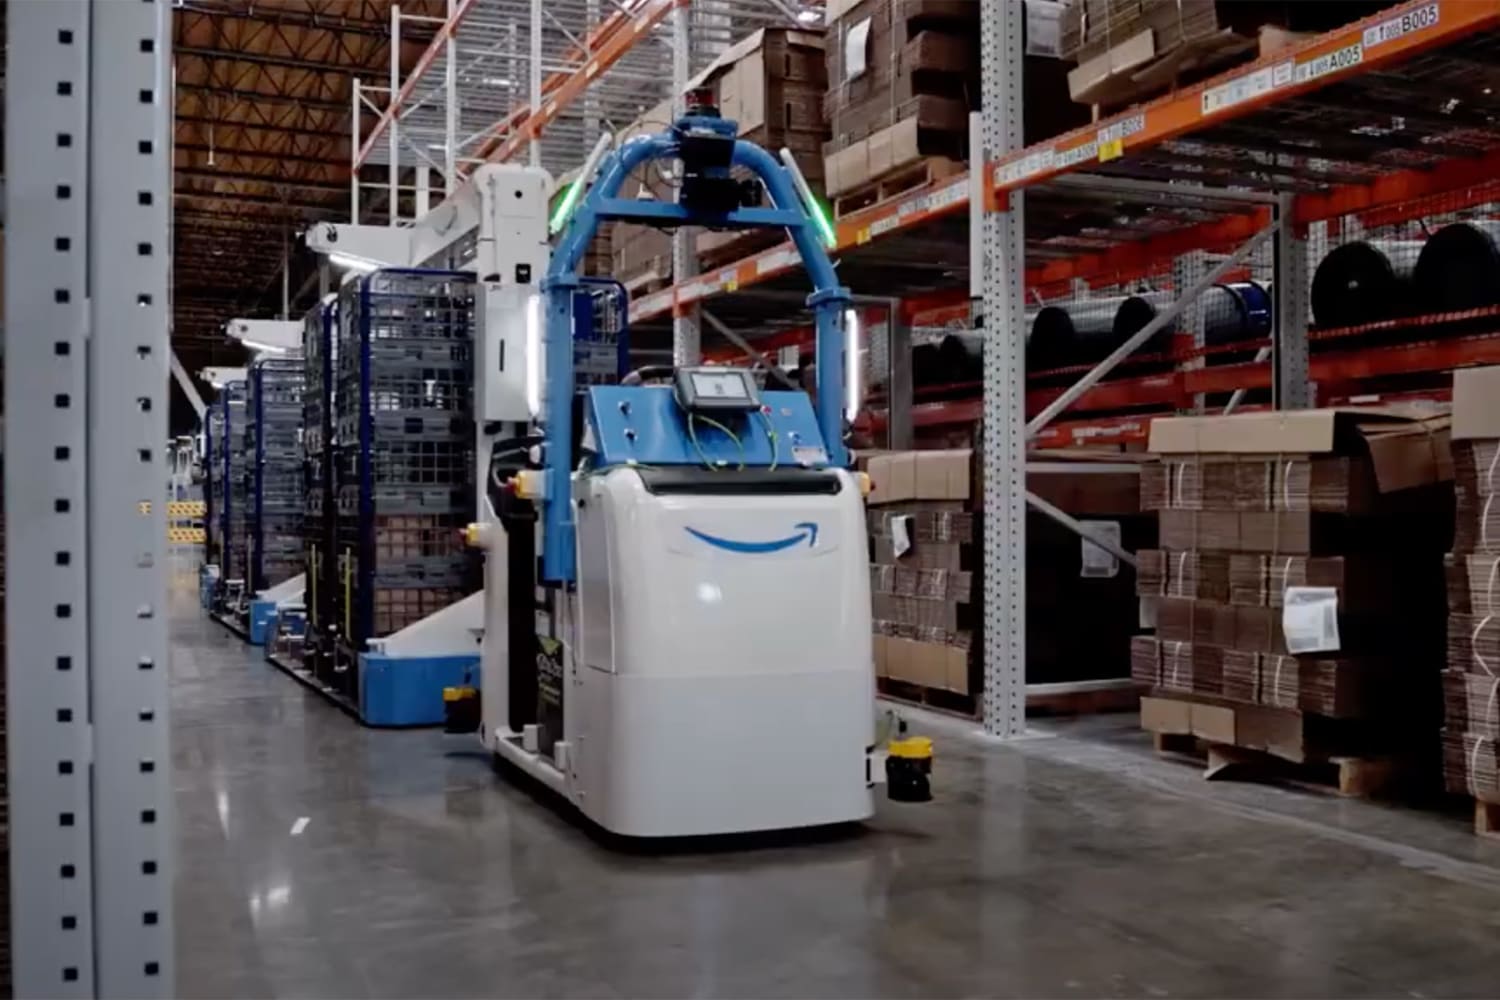 Amazon hopes more robots will improve worker safety